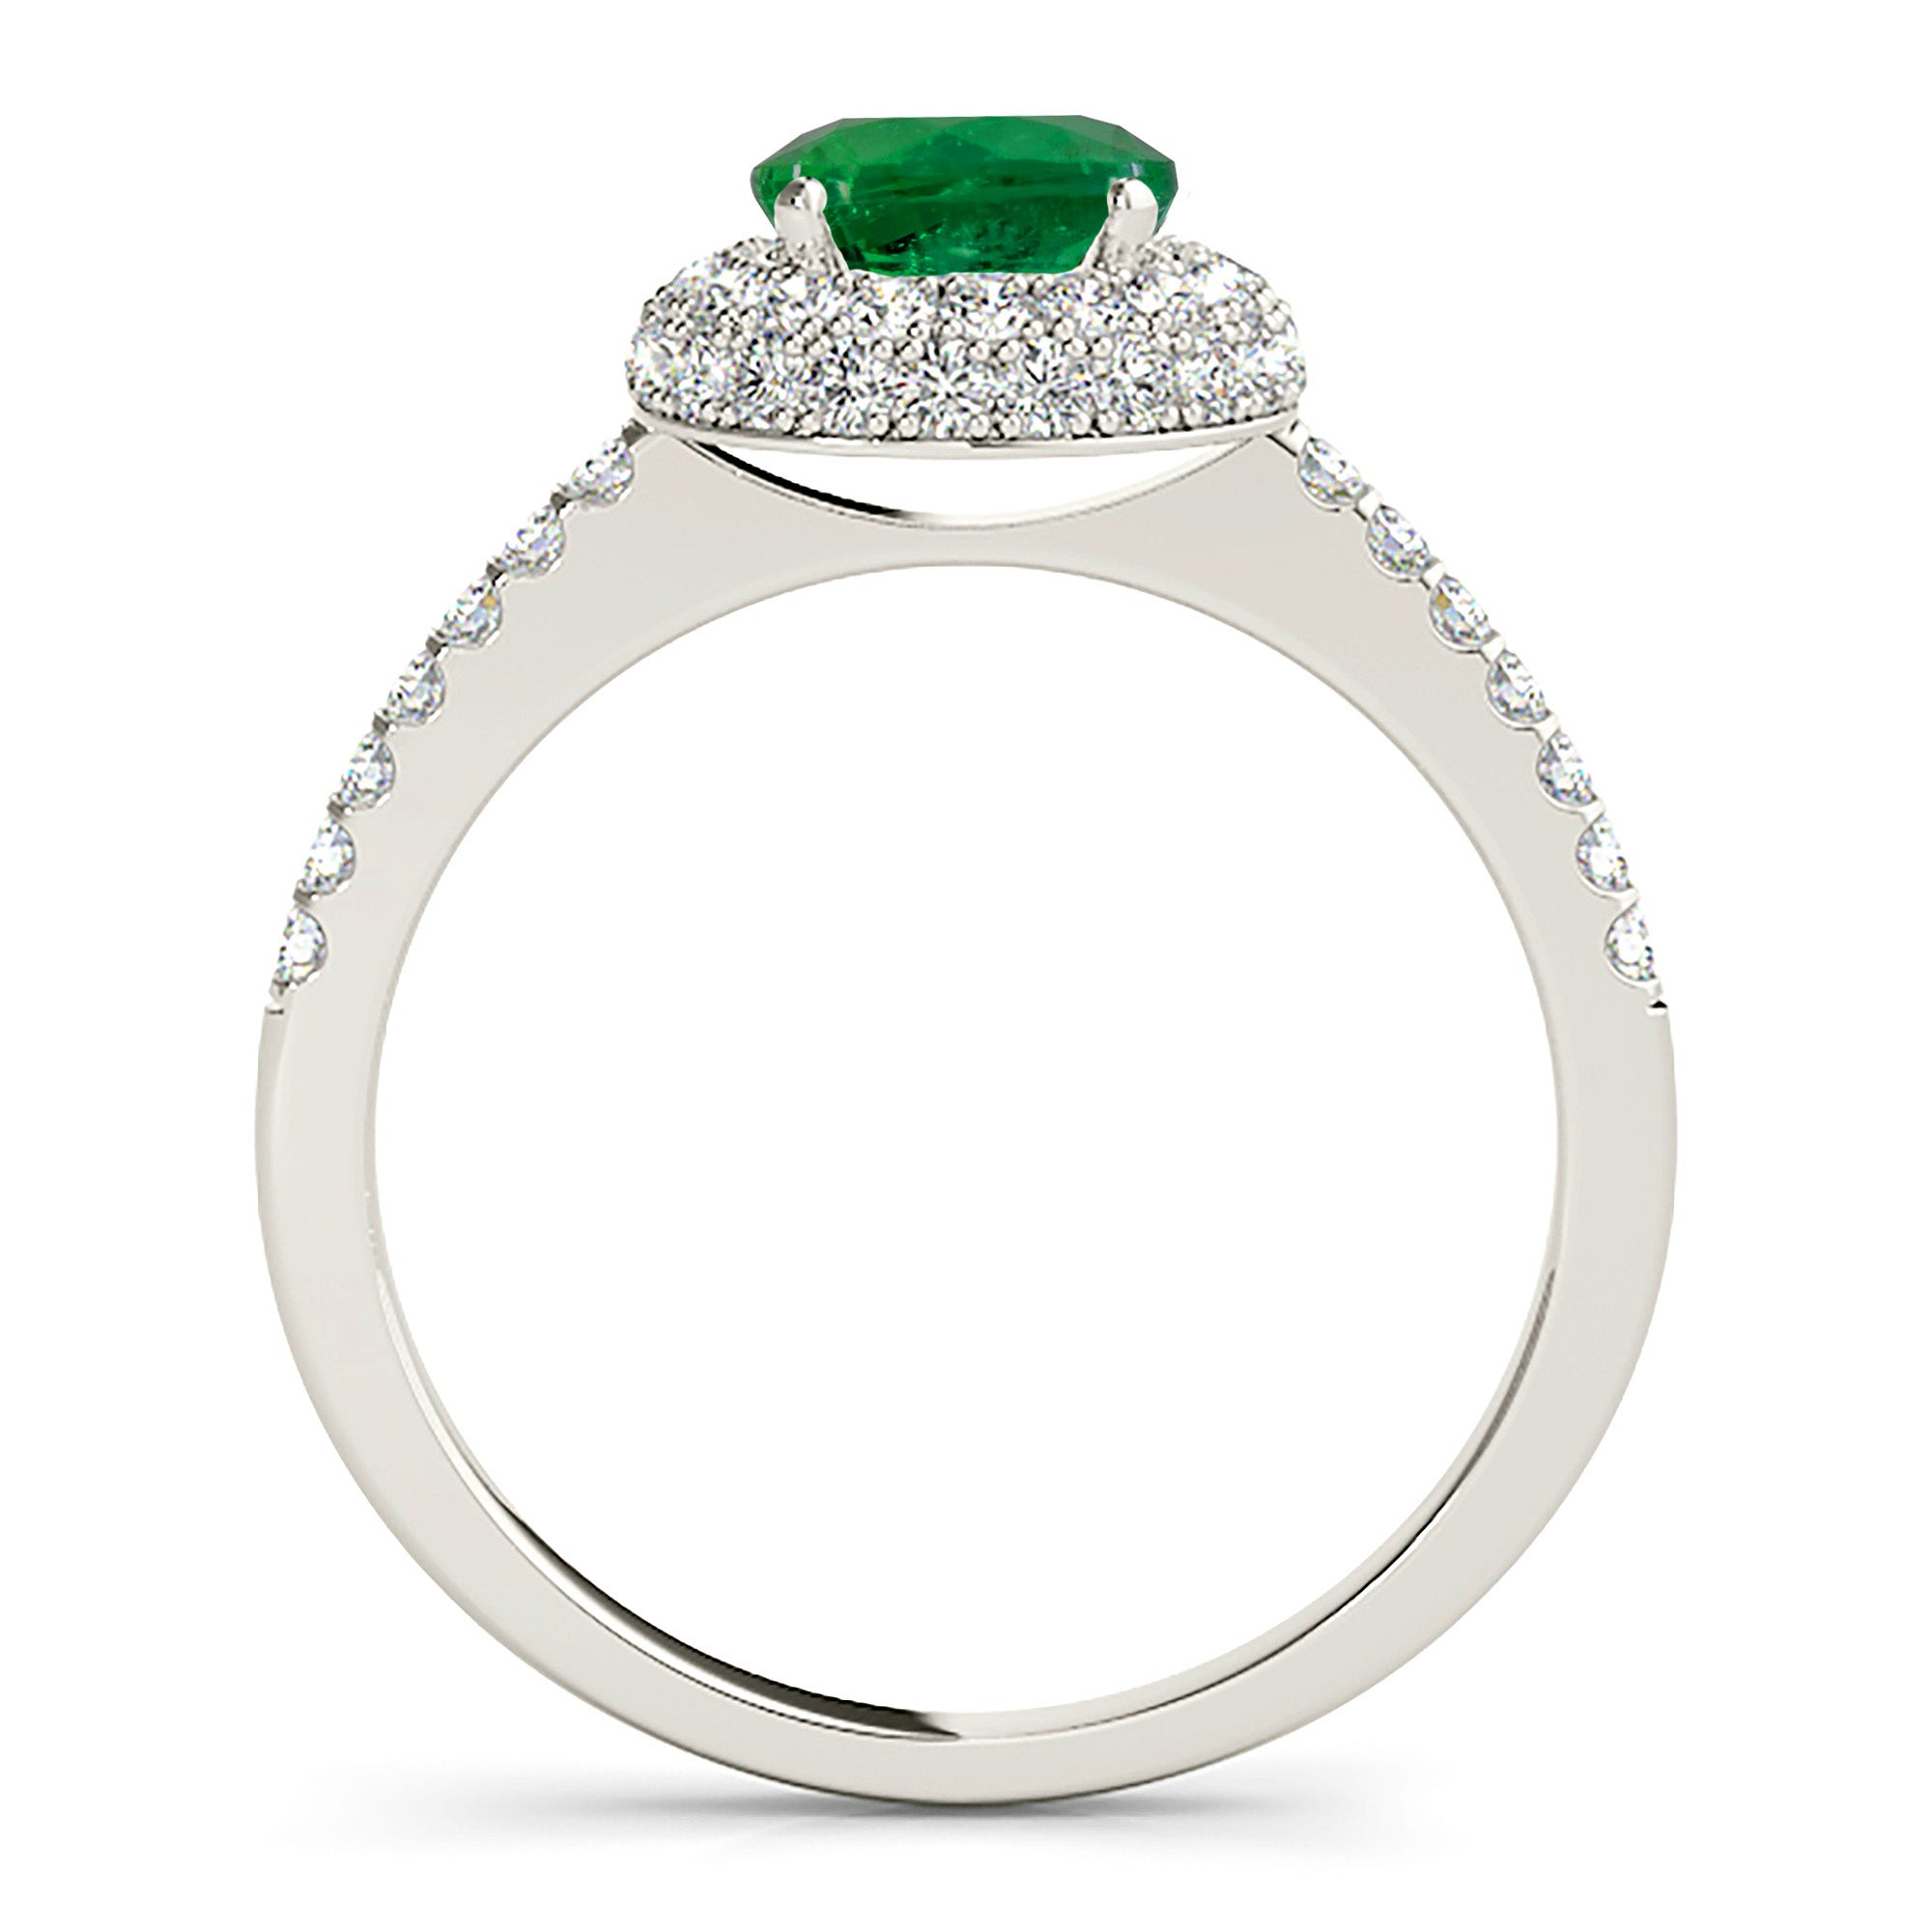 1.14 ct. Genuine Emerald Ring With 0.50 ctw. Diamond Halo And Delicate Diamond Band-in 14K/18K White, Yellow, Rose Gold and Platinum - Christmas Jewelry Gift -VIRABYANI